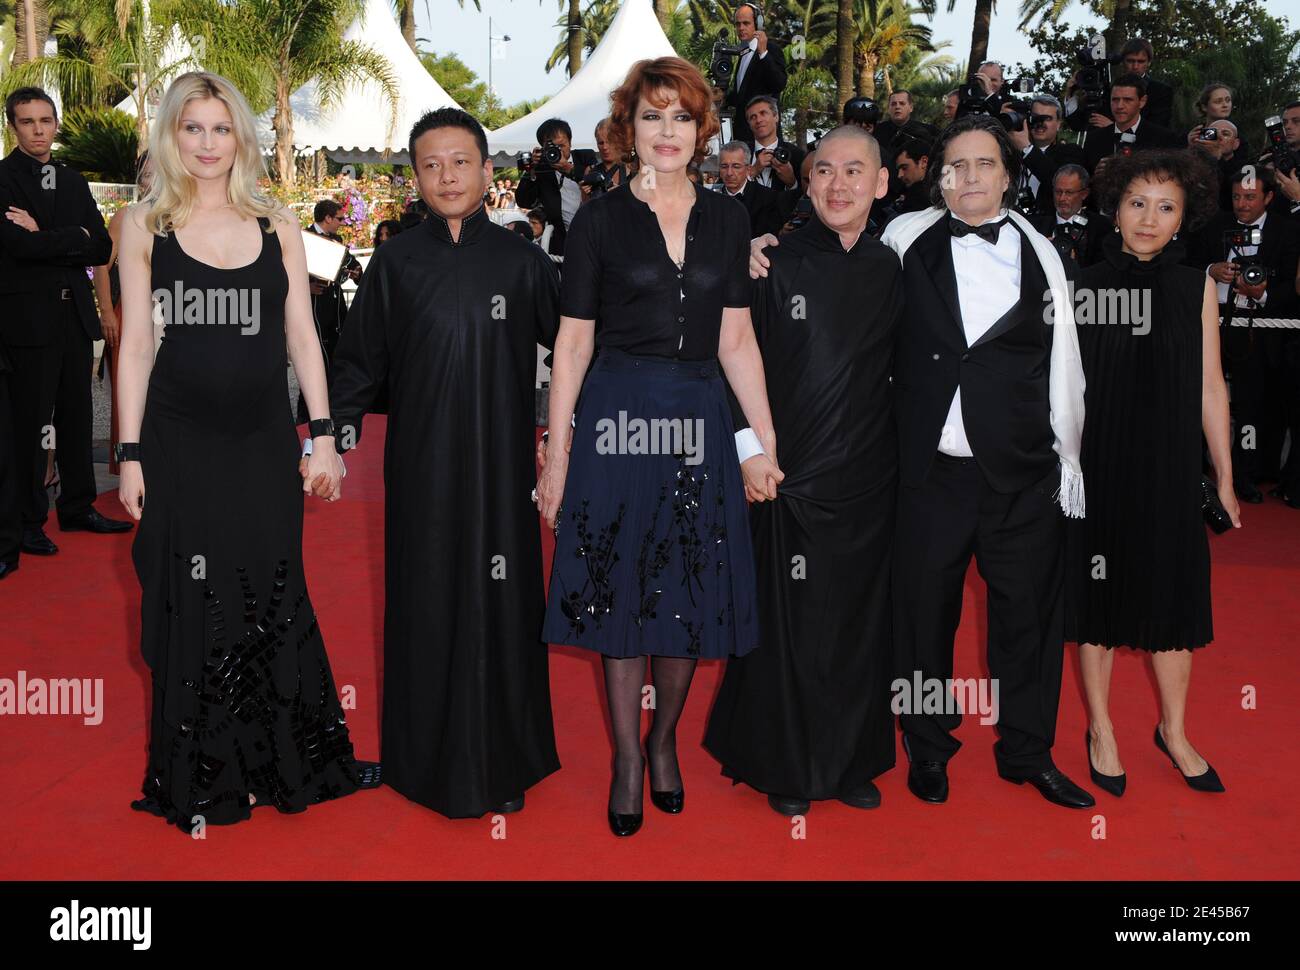 'Yi-Ching Lu, Jean-Pierre Leaud, Ming-liang Tsai, Fanny Ardant, Kang-sheng Lee and Laetitia Casta attend the screening of ''Visage'' at the 62nd Cannes Film Festival. Cannes, France, May 23, 2009. Photo by Lionel Hahn/ABACAPRESS.COM' Stock Photo